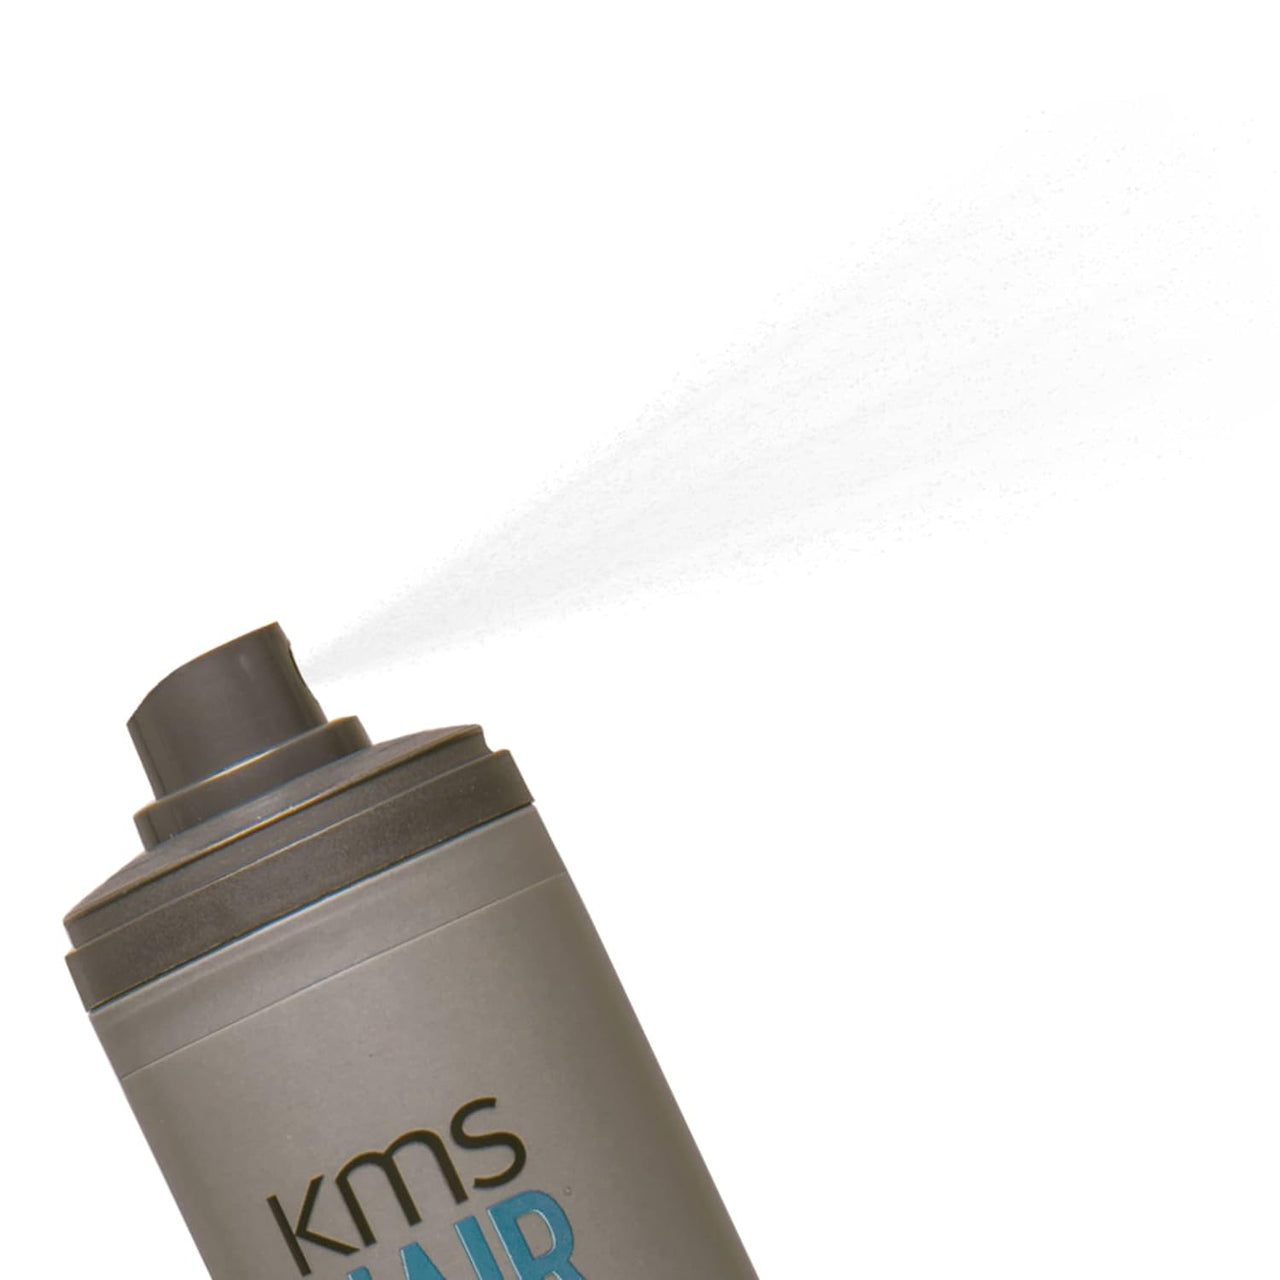 KMS Hairstay Anti-Humidity Seal Spray - Weightless, Natural Shine, Flexible Shield, Unisex, 4.1 oz